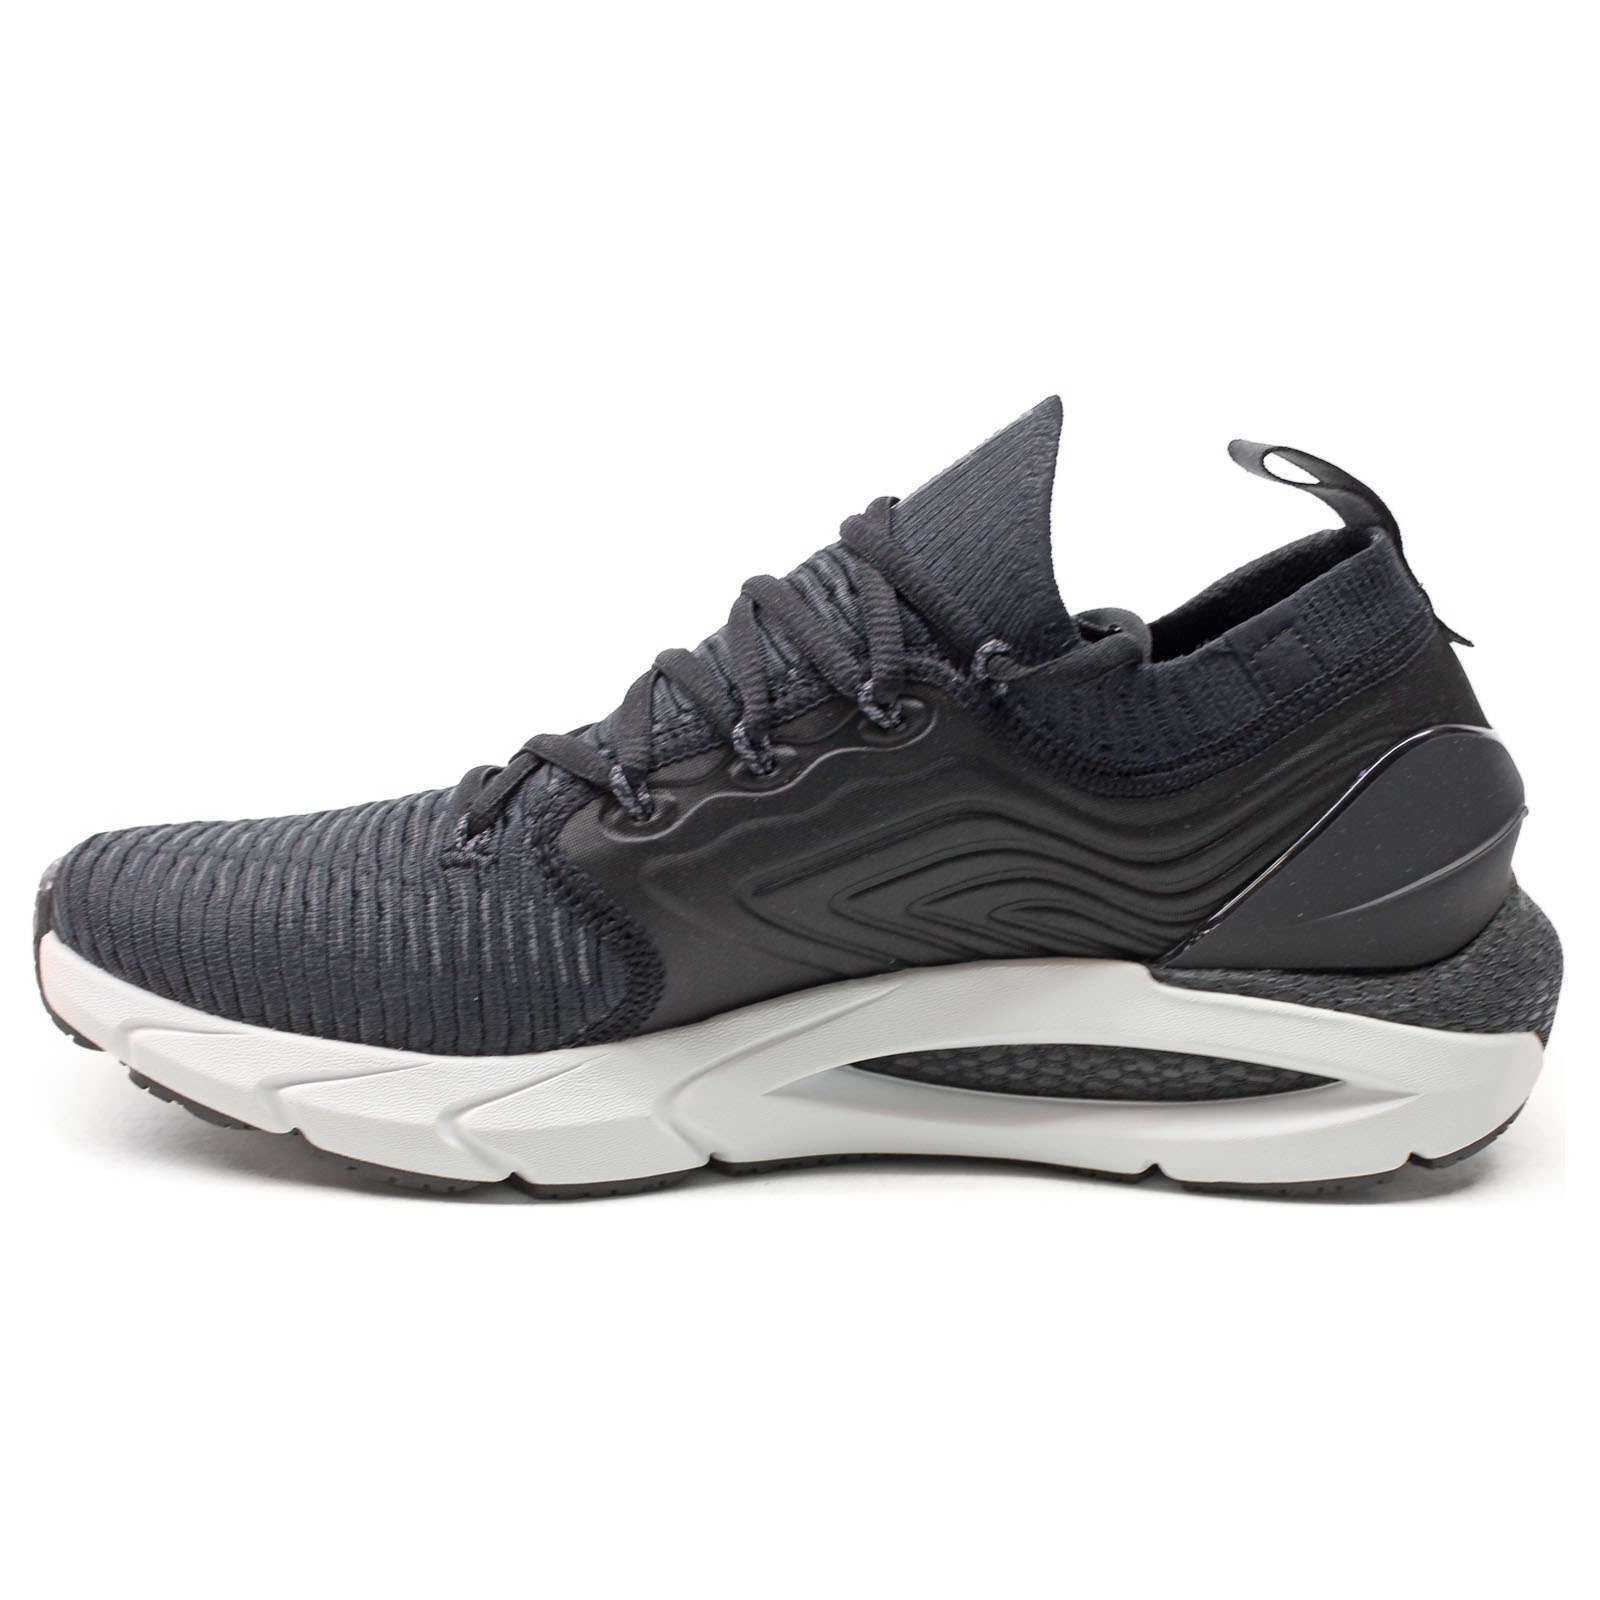 Under Armour HOVR Phantom 2 INKNT Synthetic Textile Men's Low-Top Trainers#color_black grey